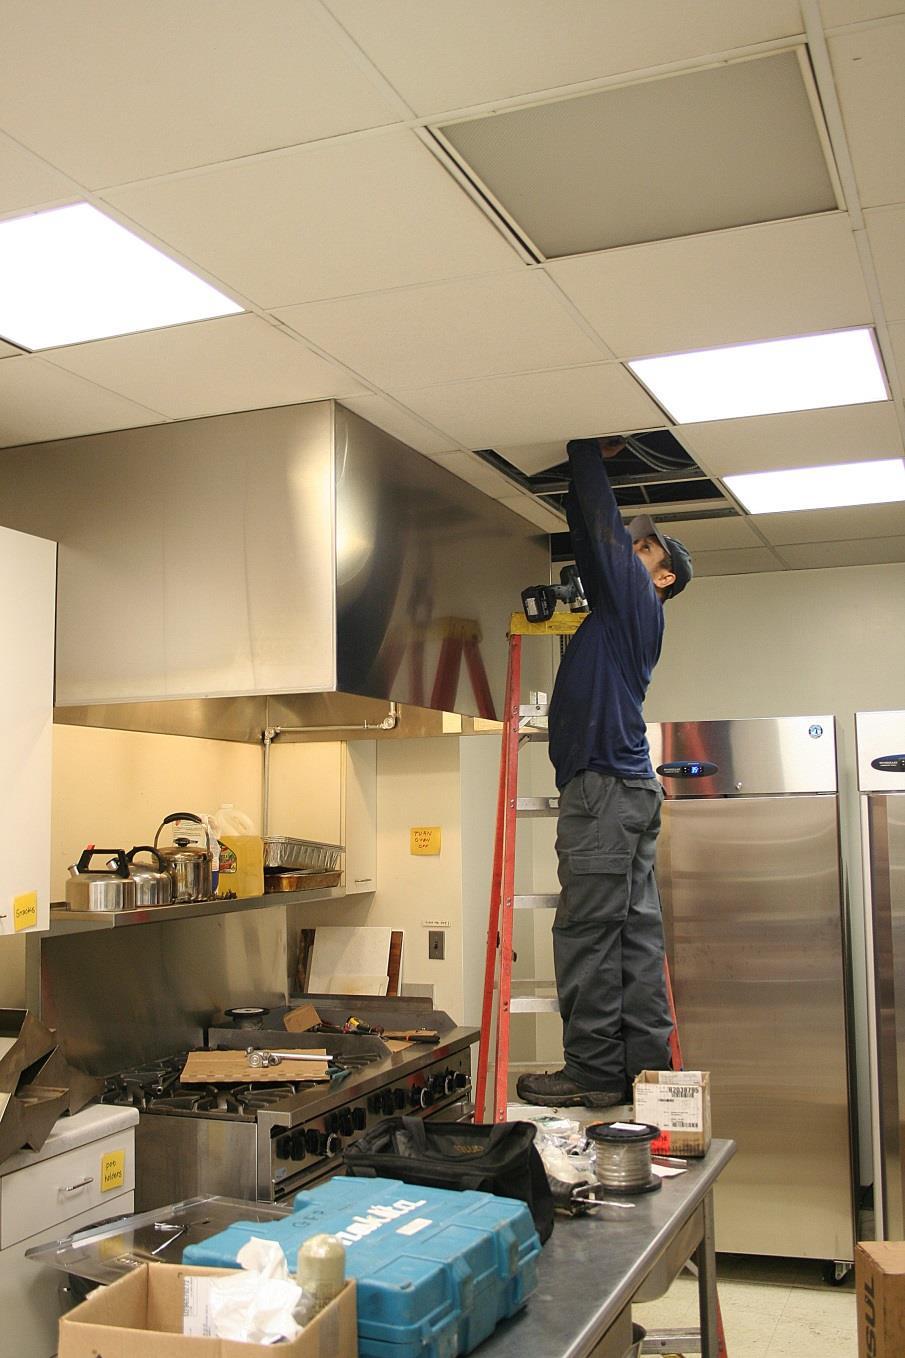 Replacing The Ansul (Fire Suppression) System For The Kitchen